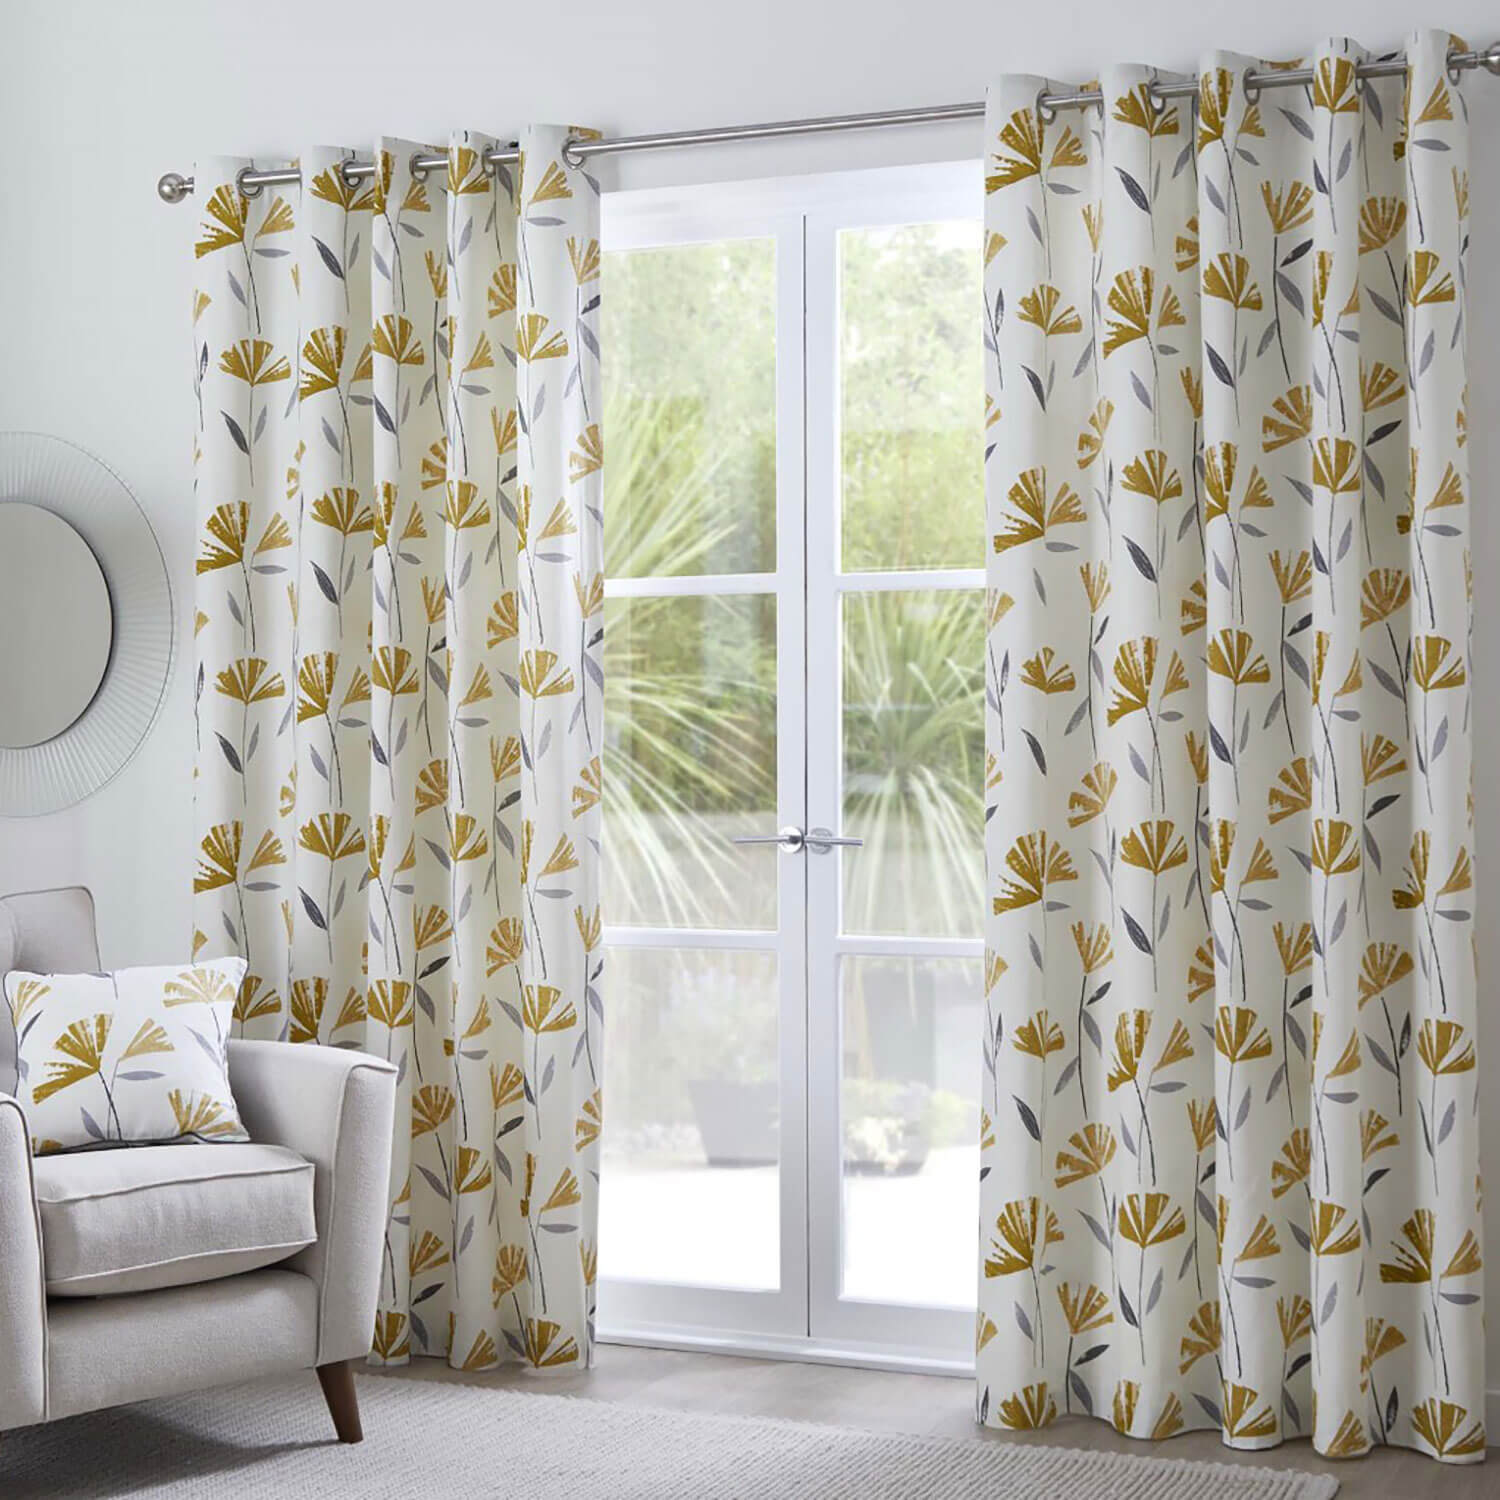 The Home Bedroom Dacey Eyelet Curtains - Ochre 1 Shaws Department Stores